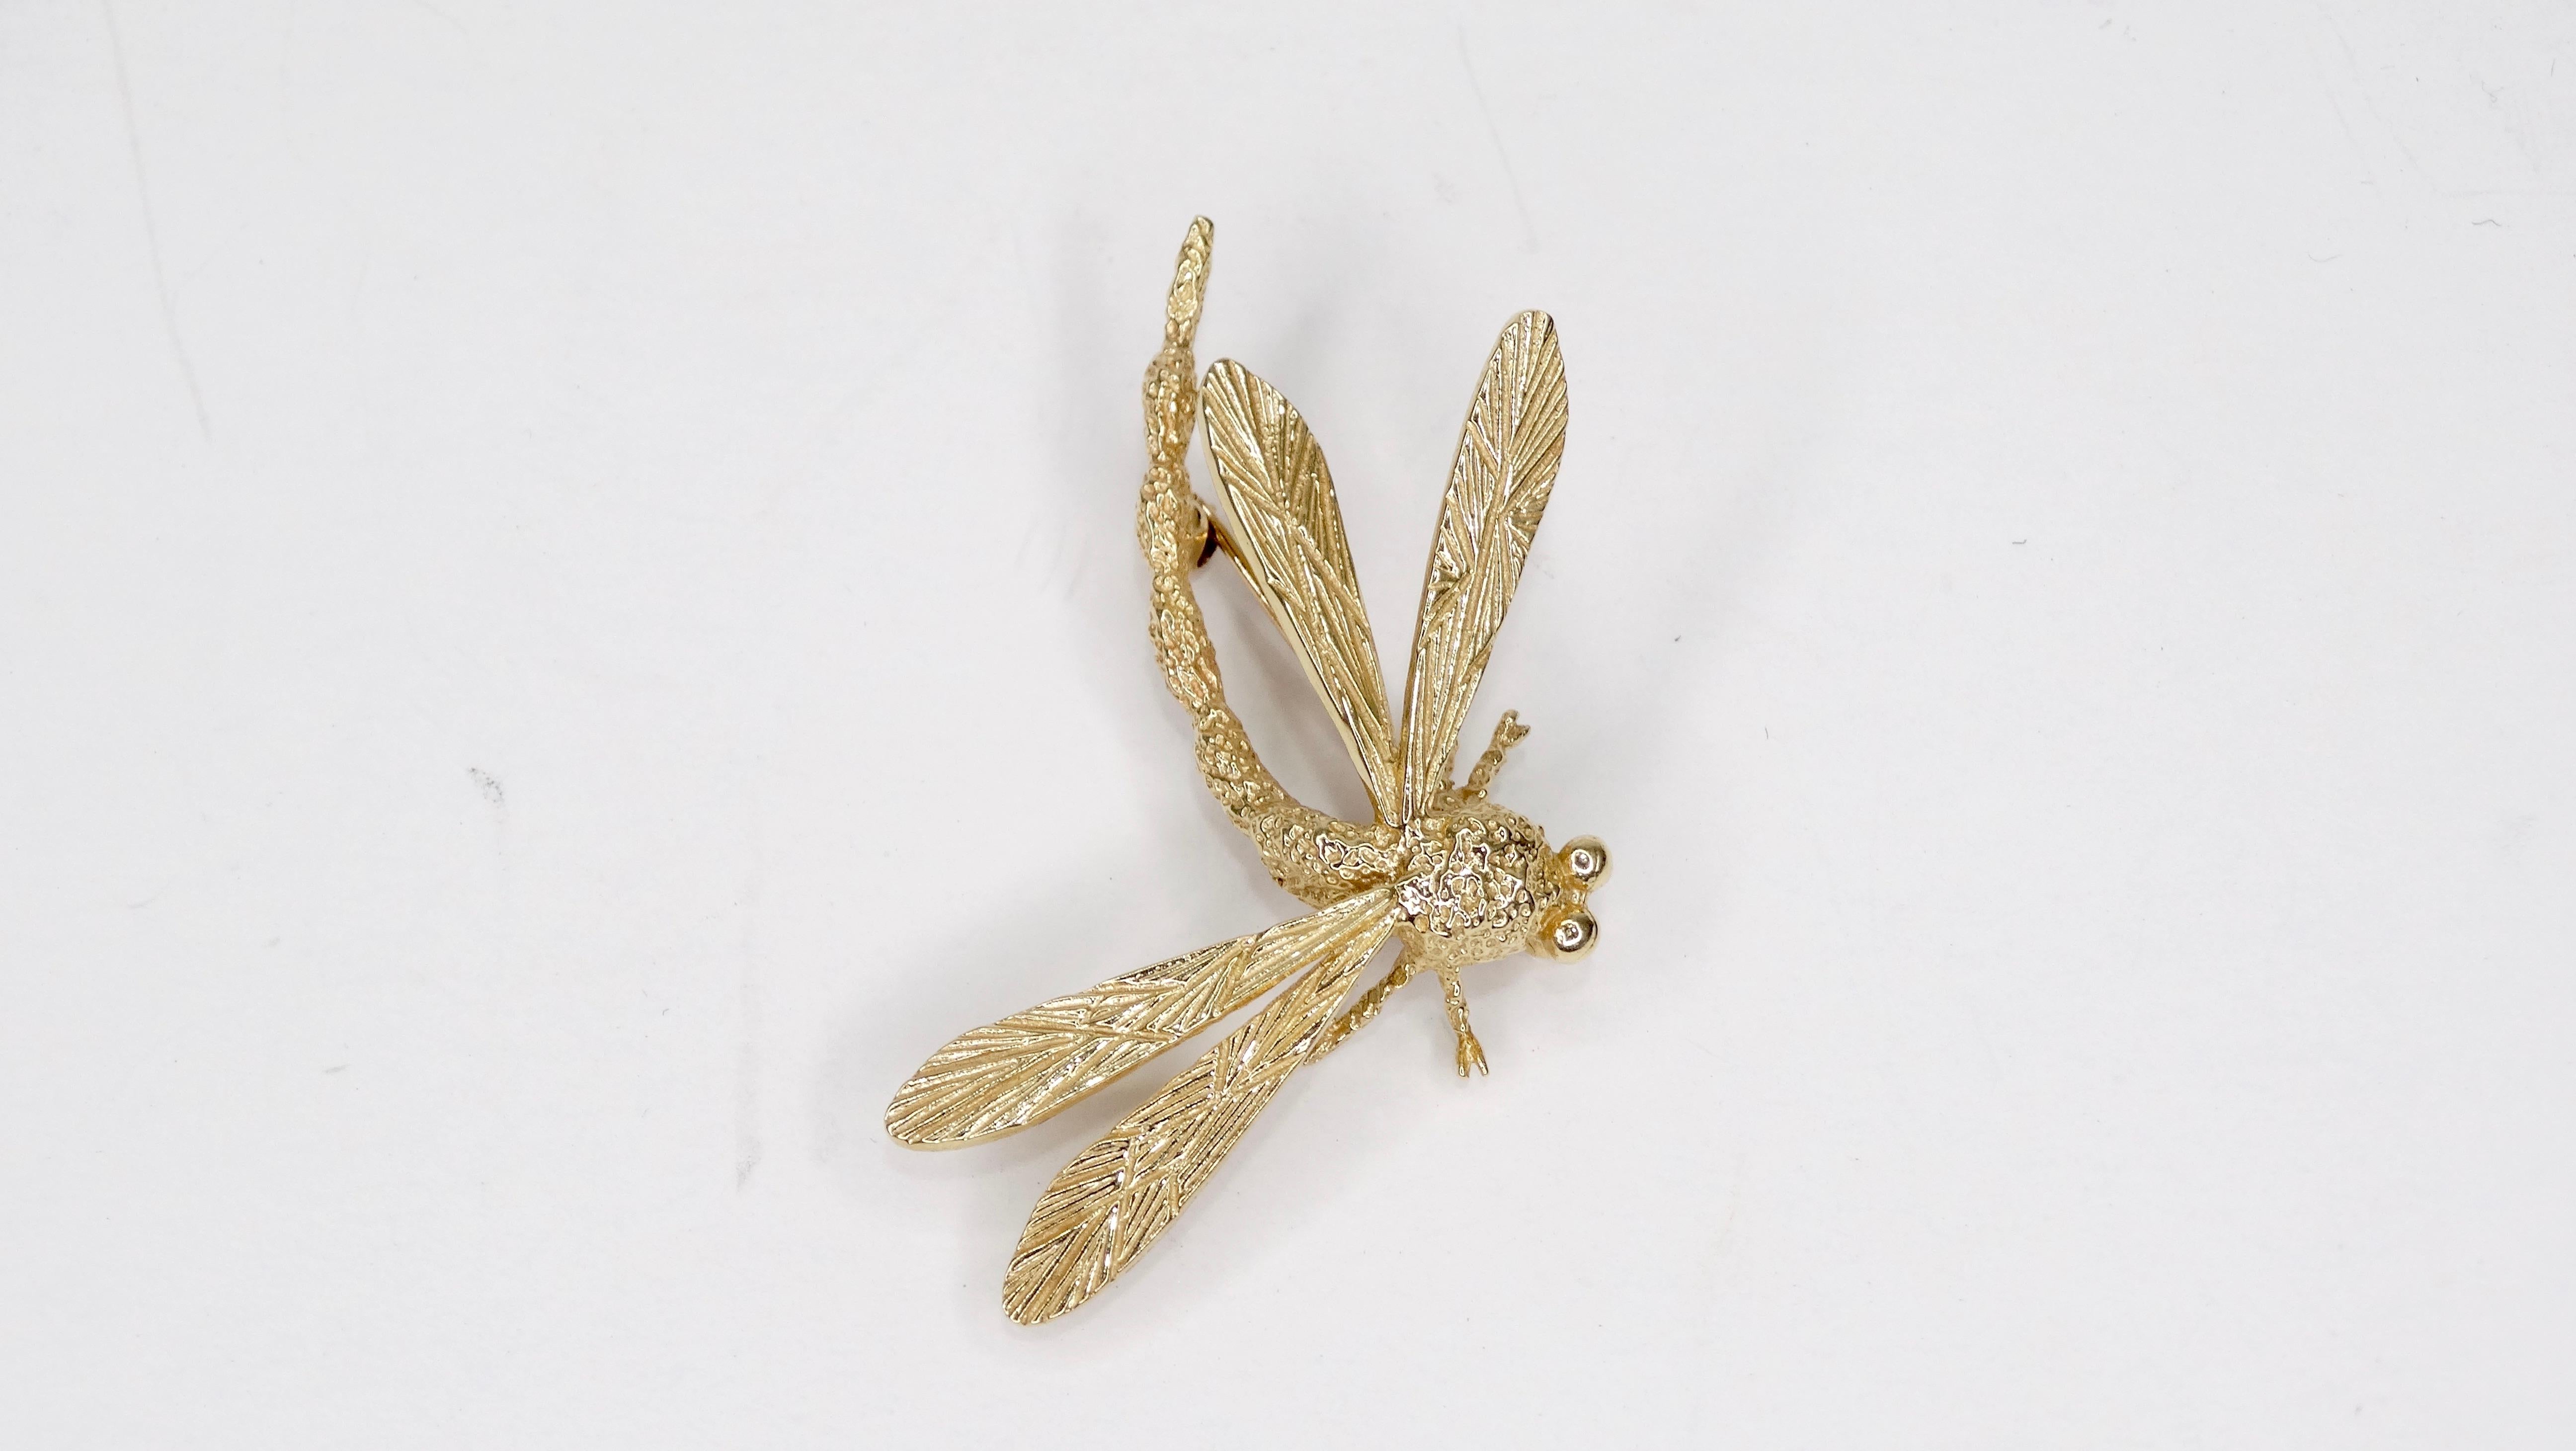 Beautiful 18k Gold dragon fly pin/brooch from the mid 20th century. Etched detailing throughout. Total weight is 5.88g. Perfect to clip on your favorite Gucci blazer or vintage Levi's denim jacket!